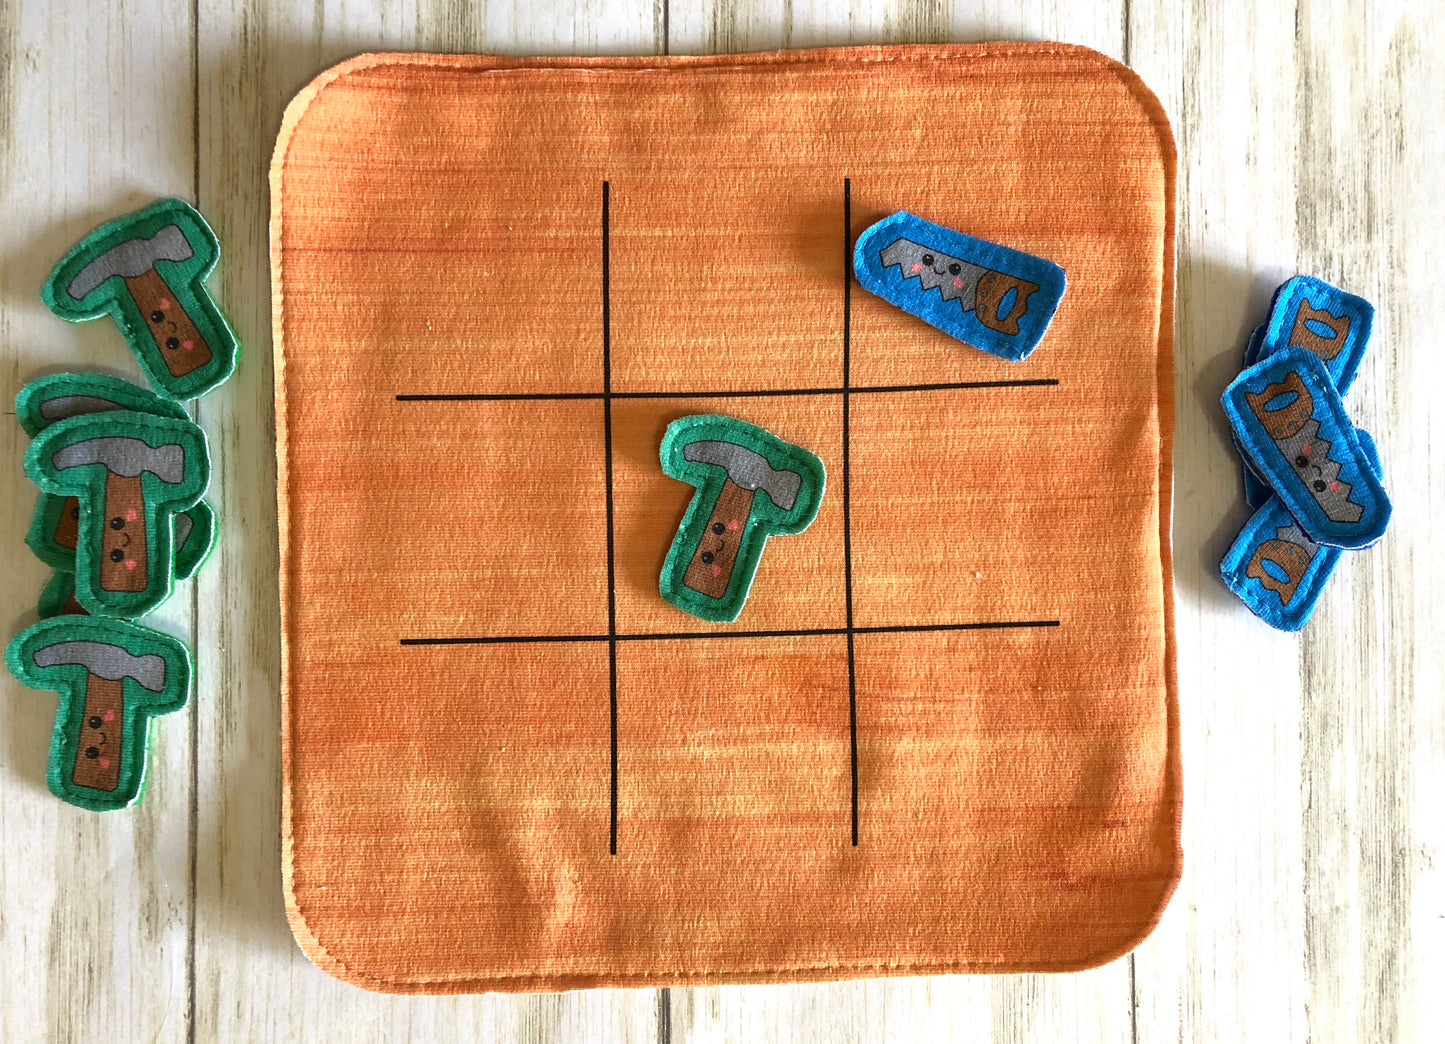 Tools TicTacToe Playing Pieces panel (TICTACTOE BOARD NOT INCLUDED - SOLD SEPARATELY)